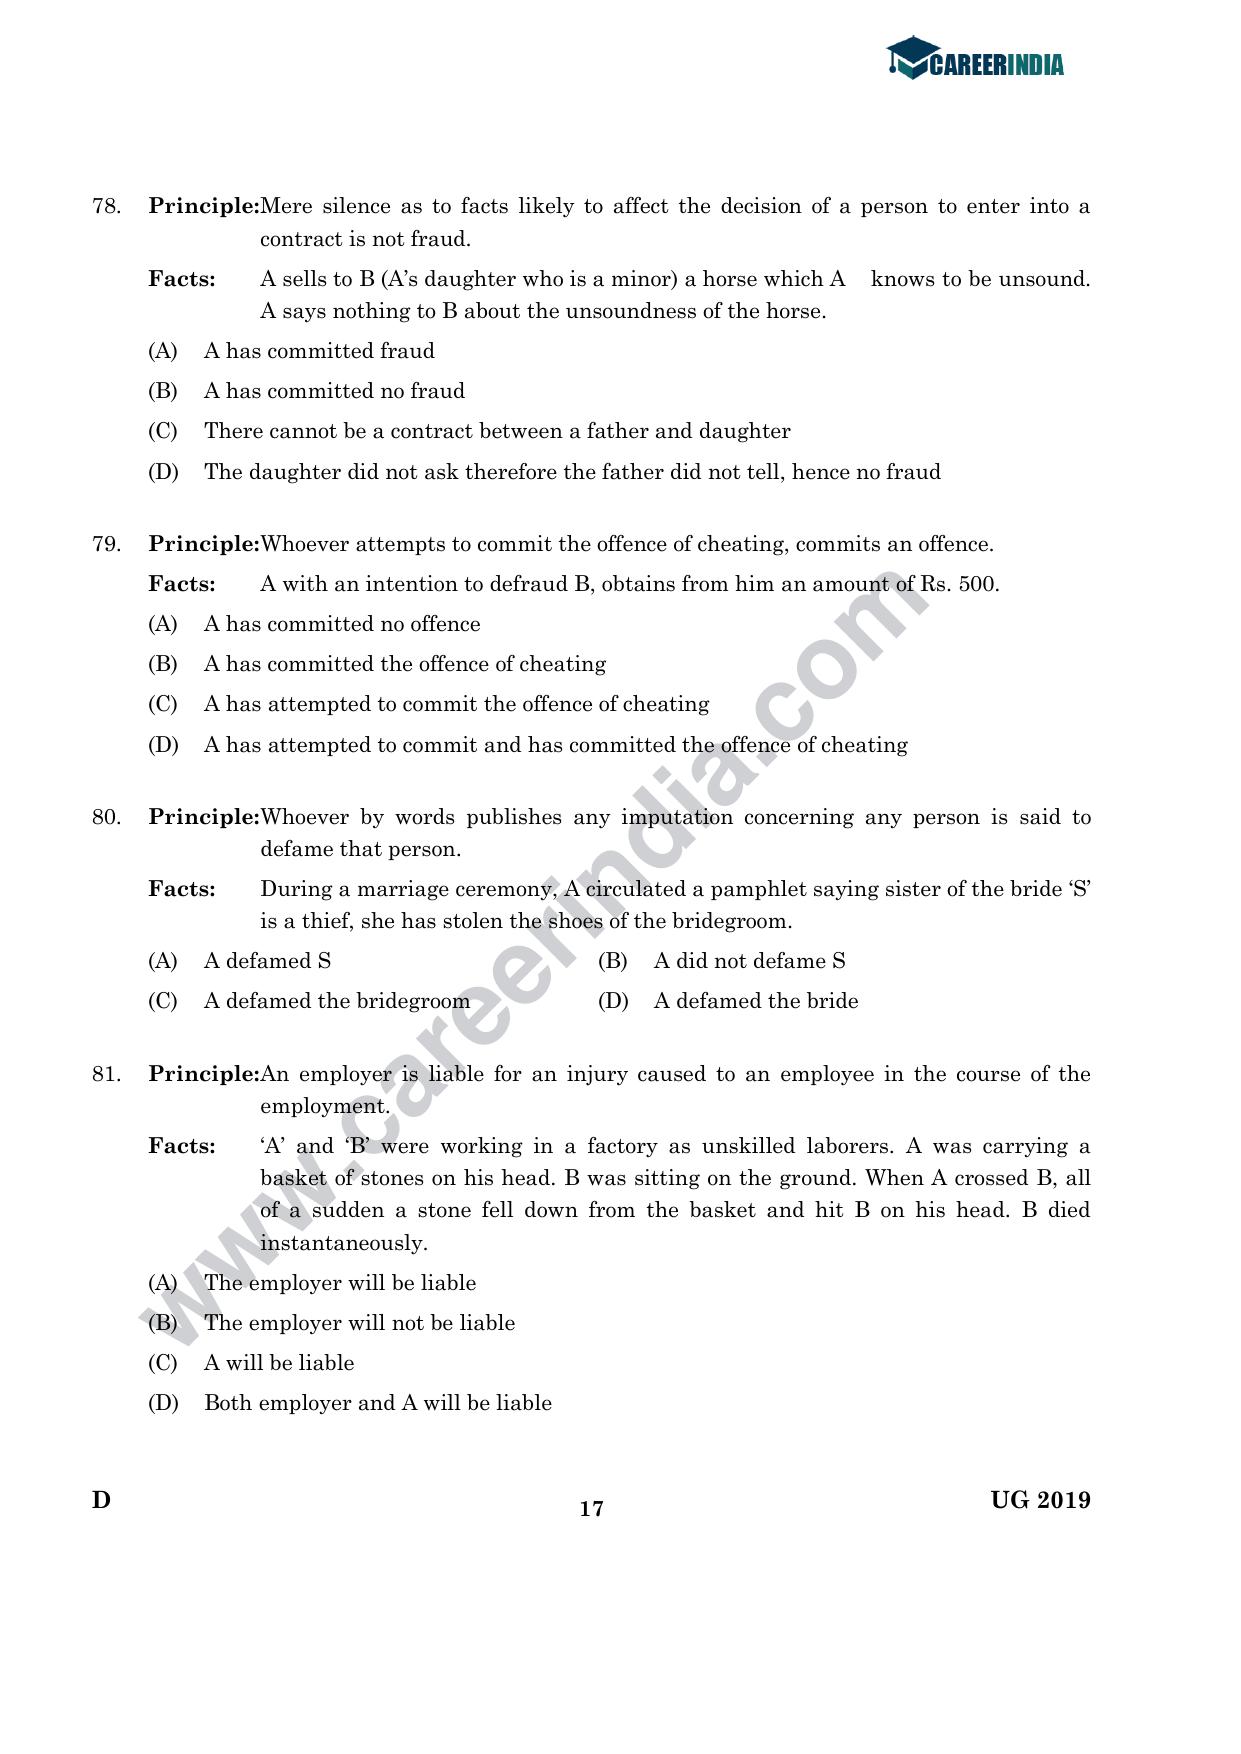 CLAT 2019 UG Logical-Reasoning Question Paper - Page 16